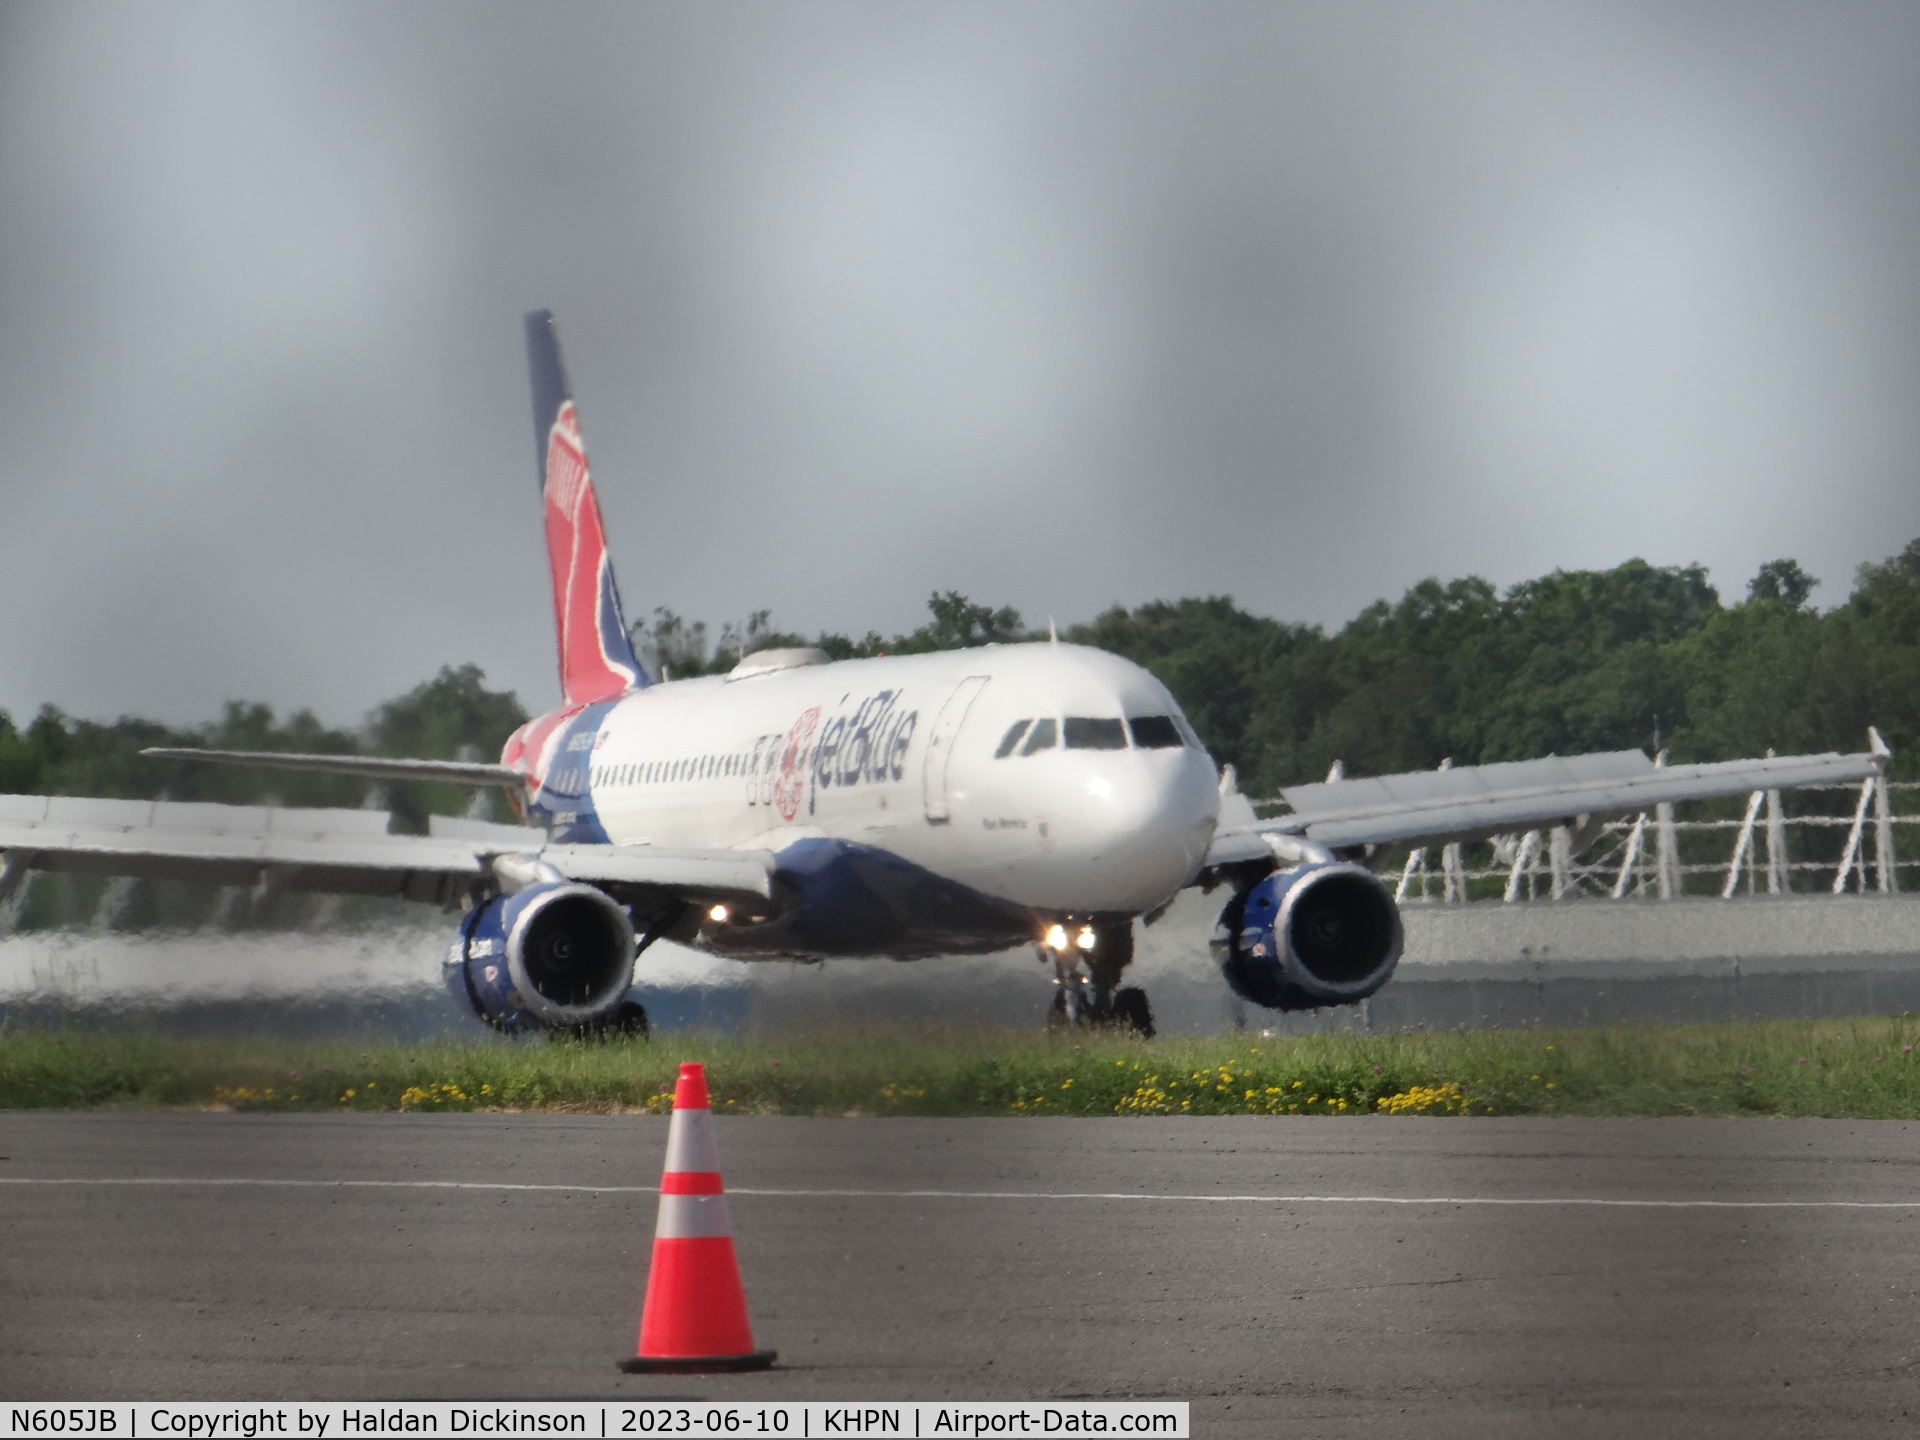 N605JB, 2005 Airbus A320-232 C/N 2368, 2005 Airbus A320-232
JetBlue Red Sox Livery
Taxi